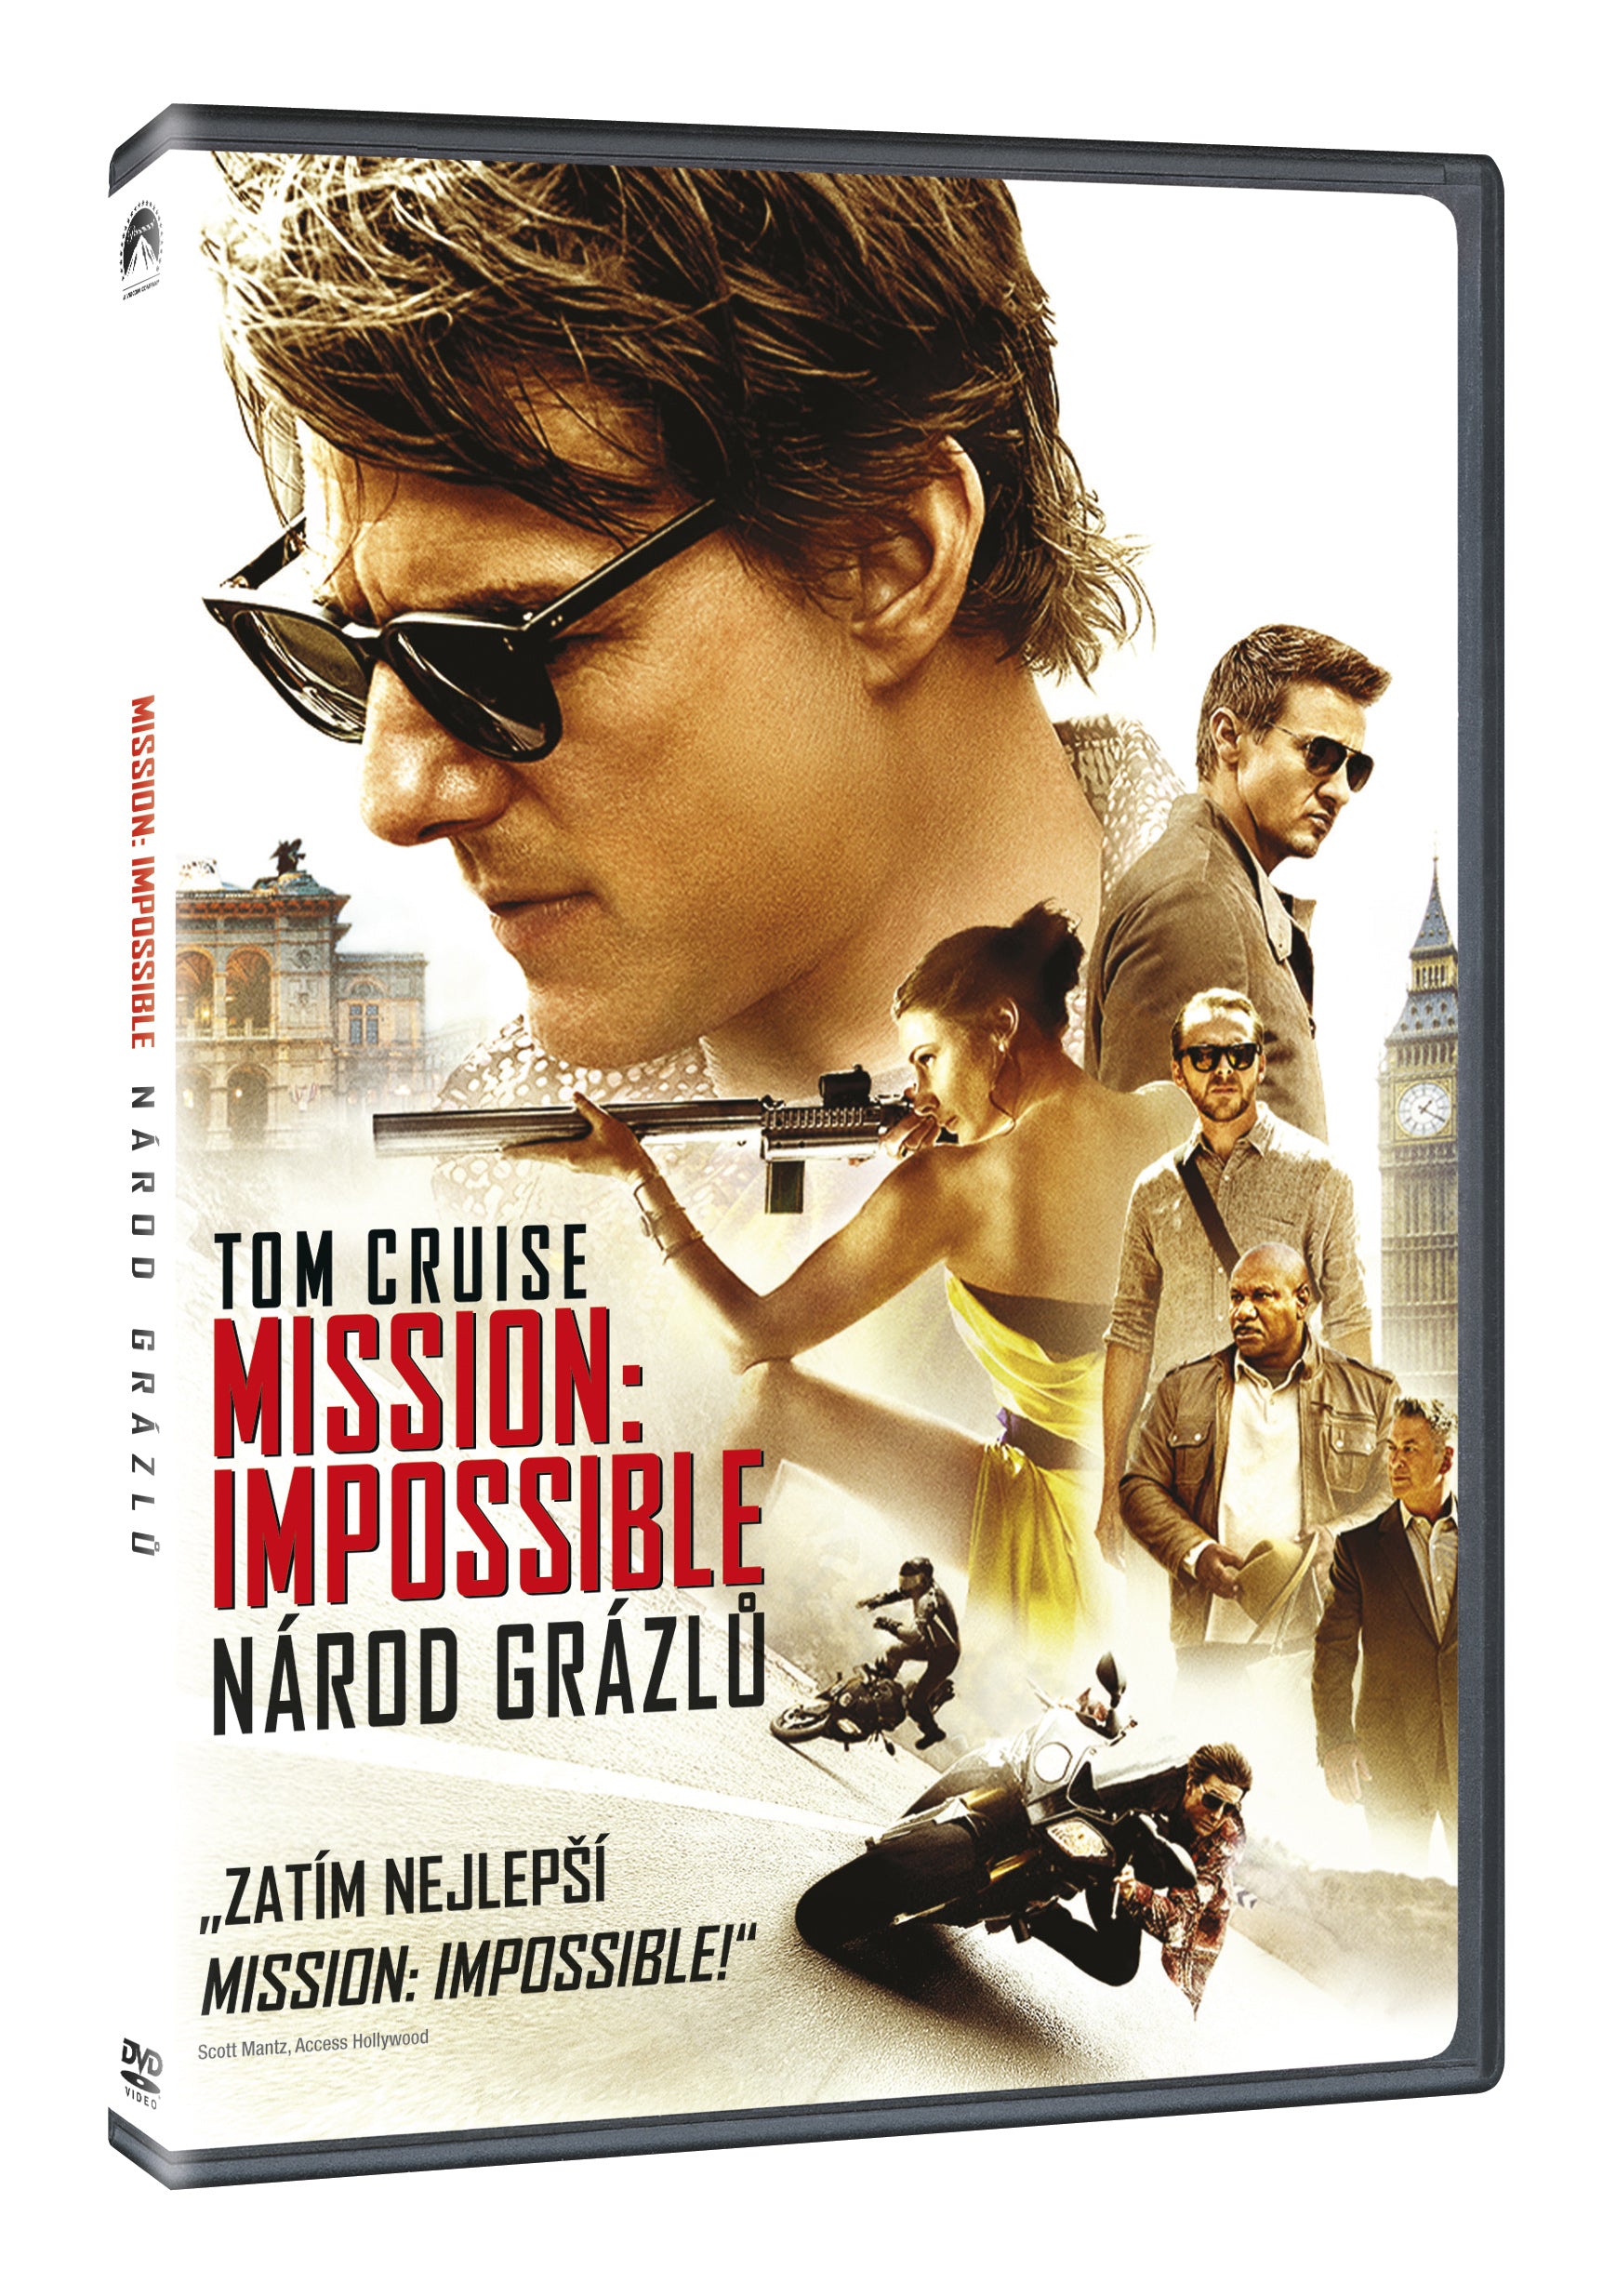 Mission: Impossible – Narod grazlu DVD / Mission: Impossible – Rogue Nation